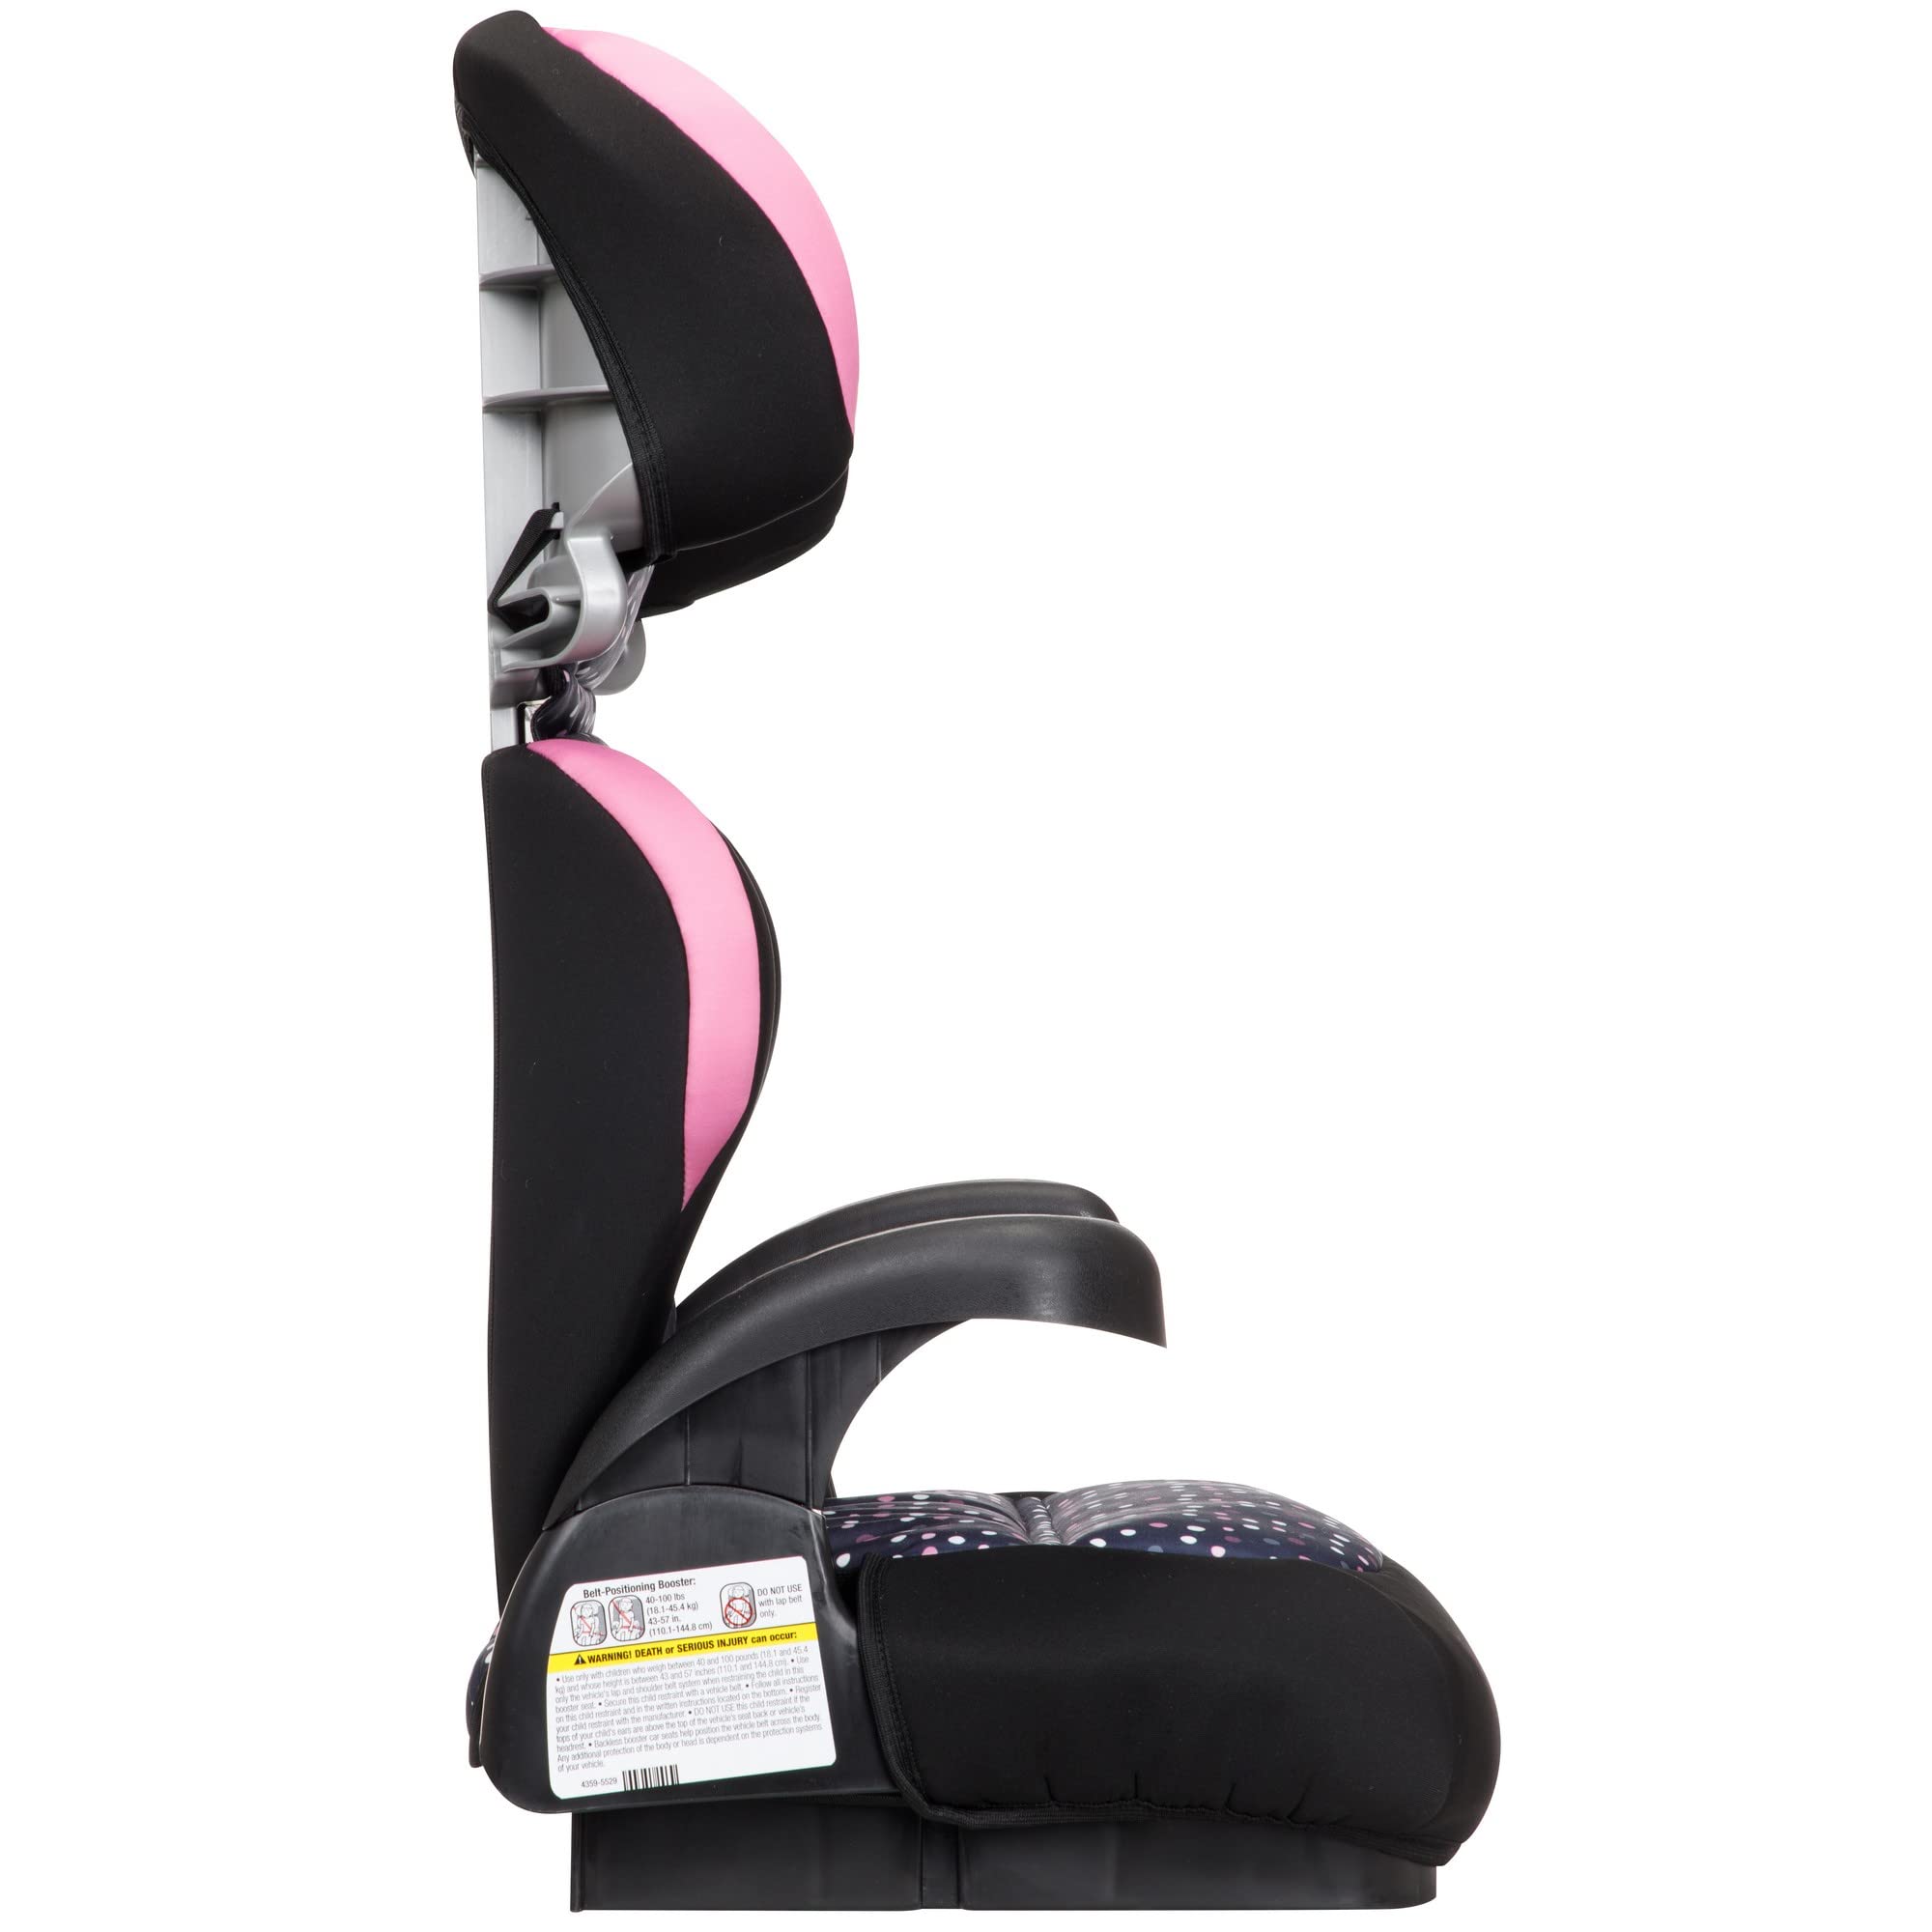 Disney Baby Pronto! Belt-Positioning Booster Car Seat, Belt-Positioning Booster: 40–100 pounds, Minnie Dot Party